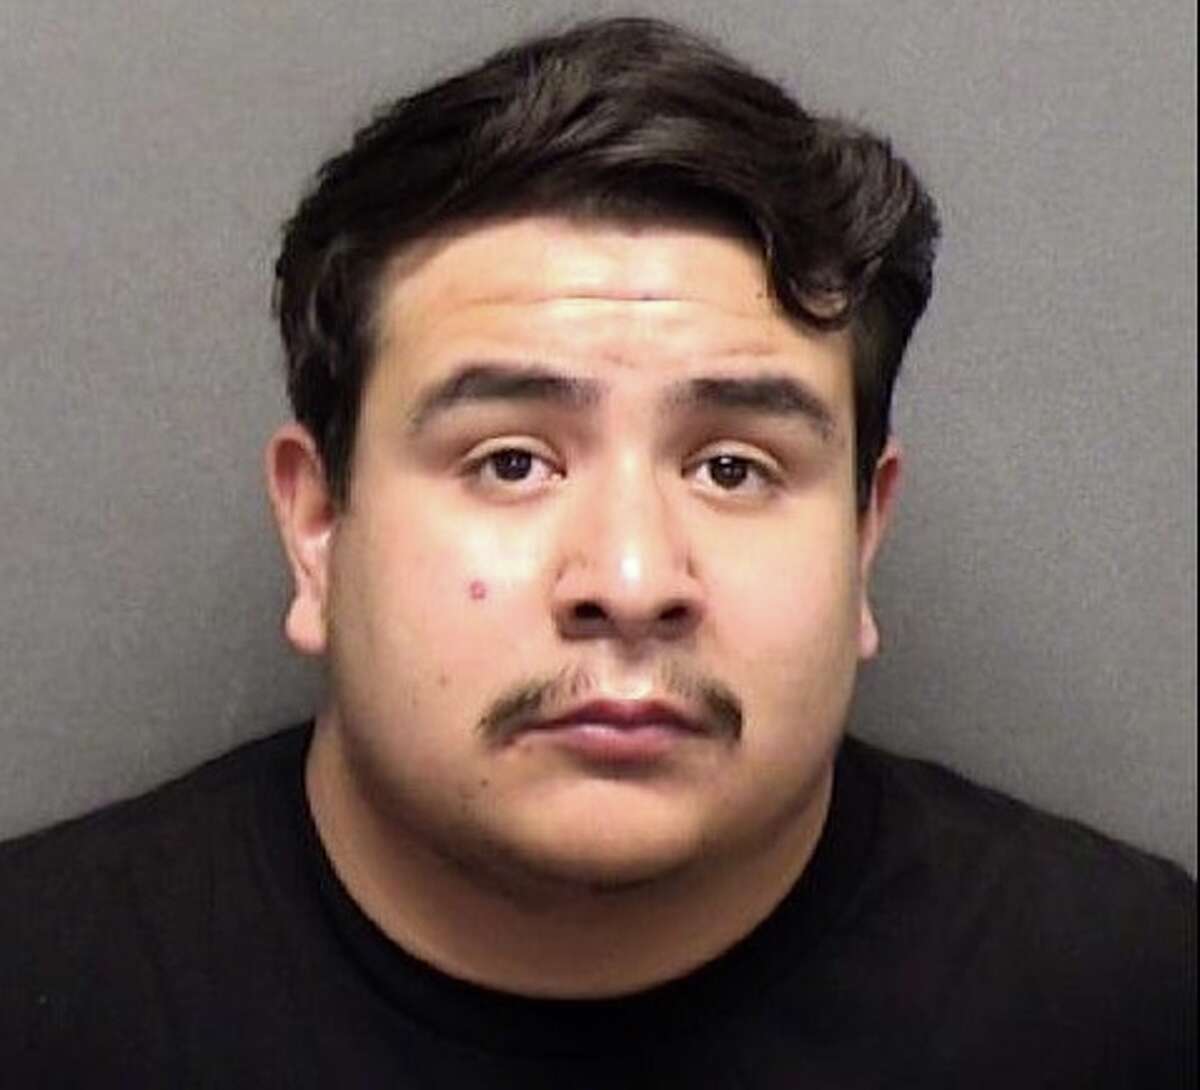 Michael Uriegas, 22, was charged with animal cruelty in connection with the death of his girlfriend’s dog.